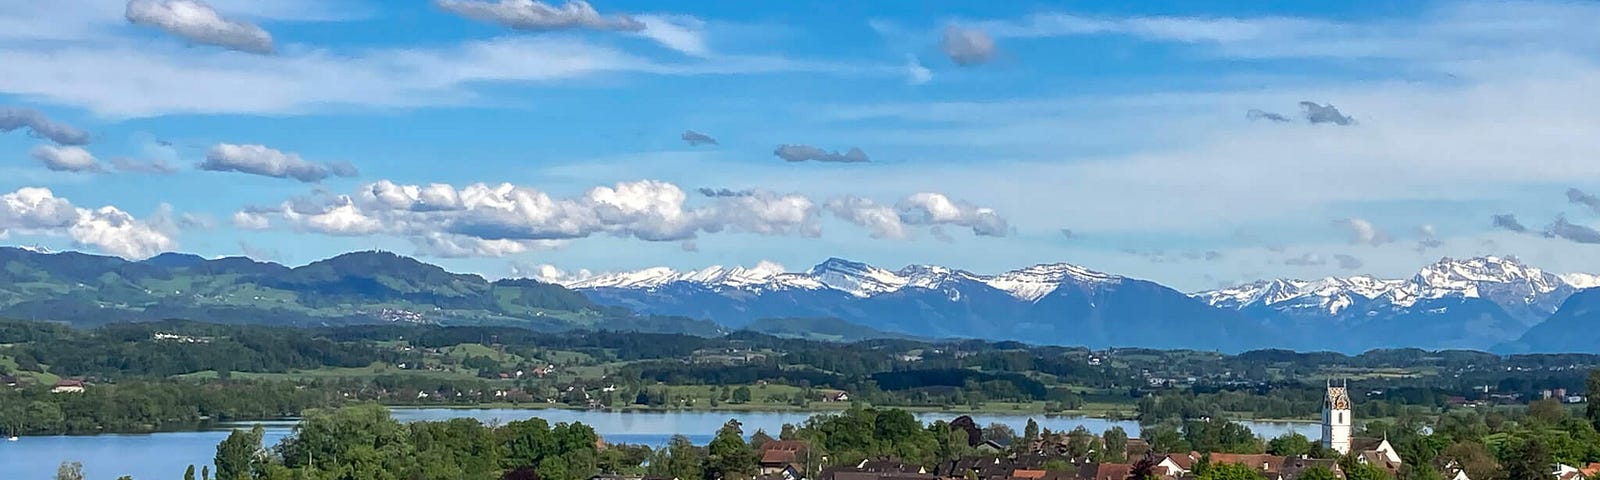 Picturesque Swiss town with green field in foreground and lake and mountains in the background. The wealthy Swiss aren’t as worried about rising sea levels because we have no coastline, only lakes